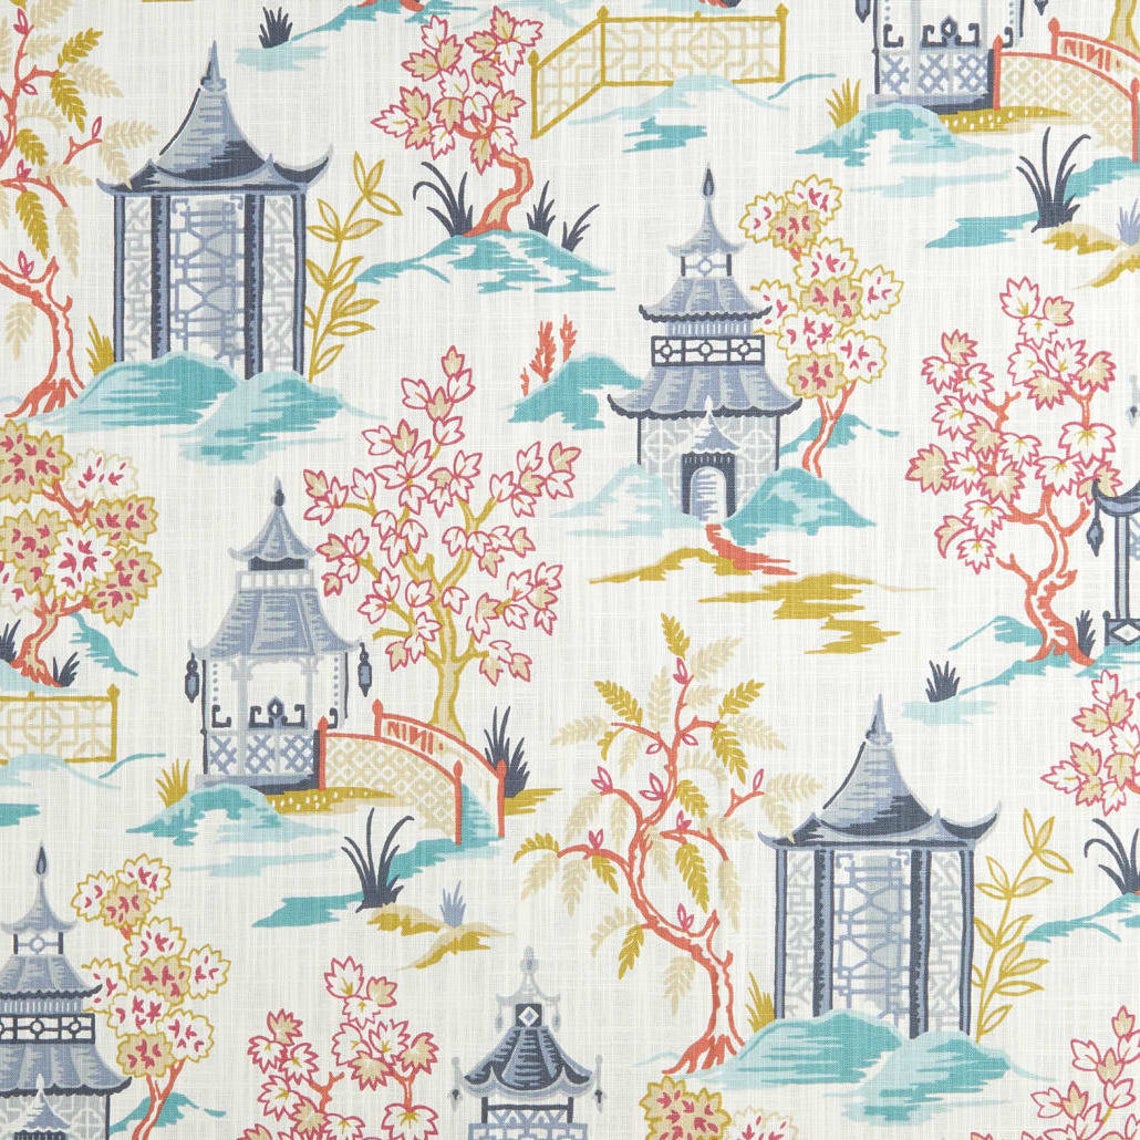 gathered bedskirt in shoji summer oriental toile, multicolor chinoiserie